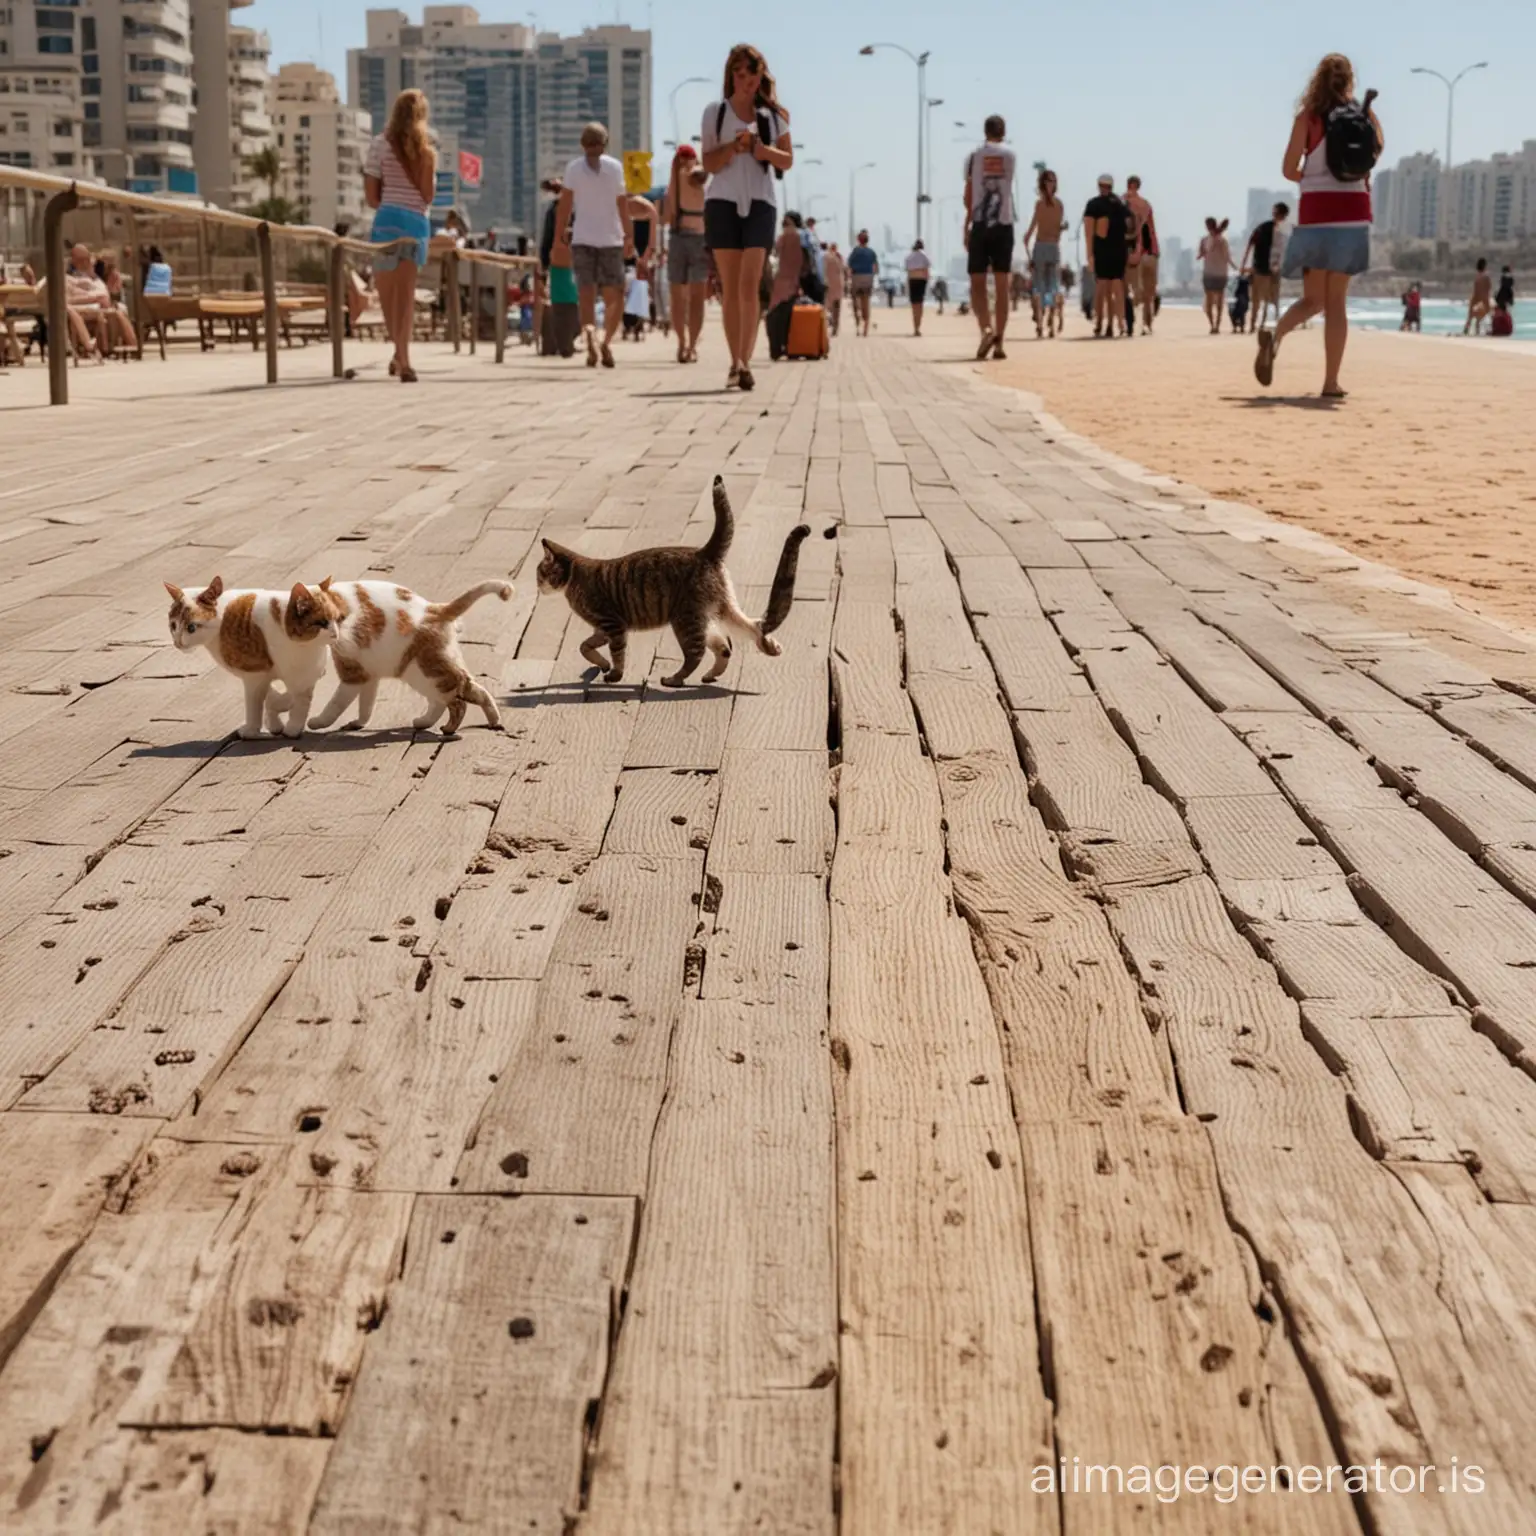 tel aviv boardwalk close up with people and cats